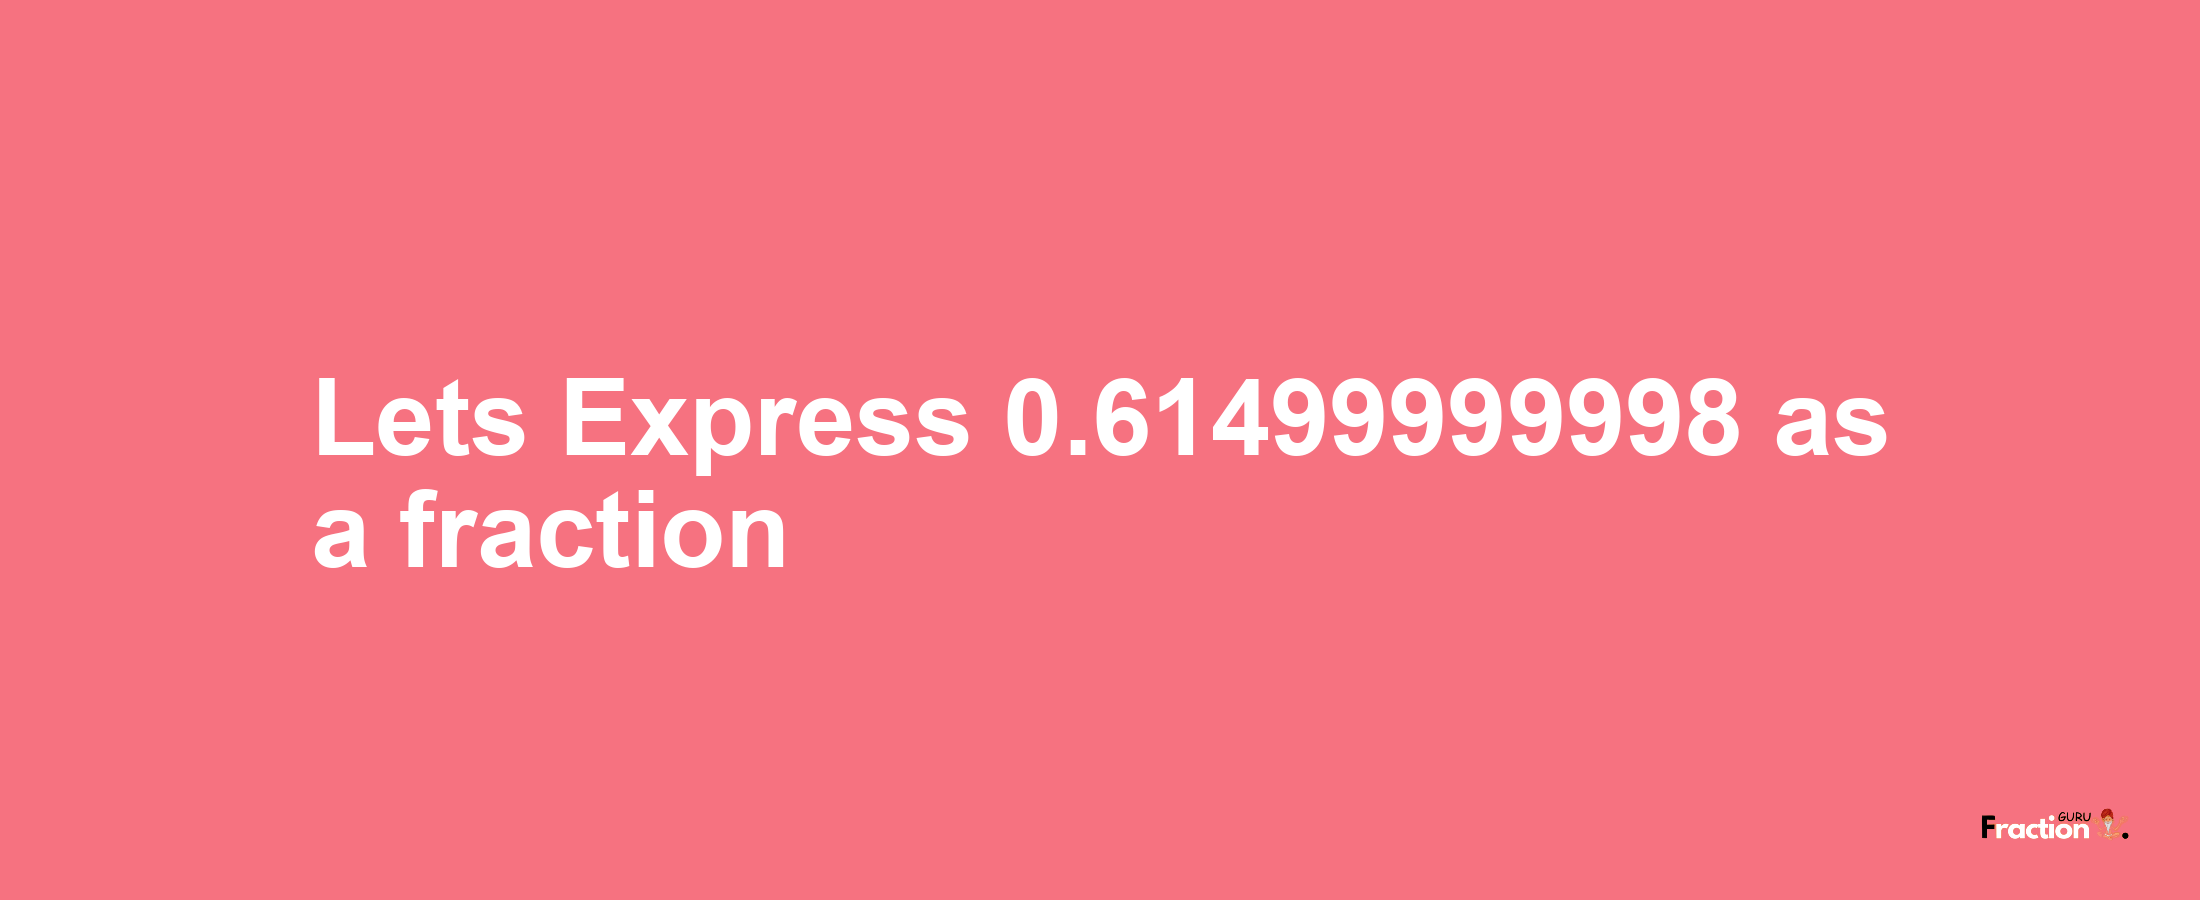 Lets Express 0.61499999998 as afraction